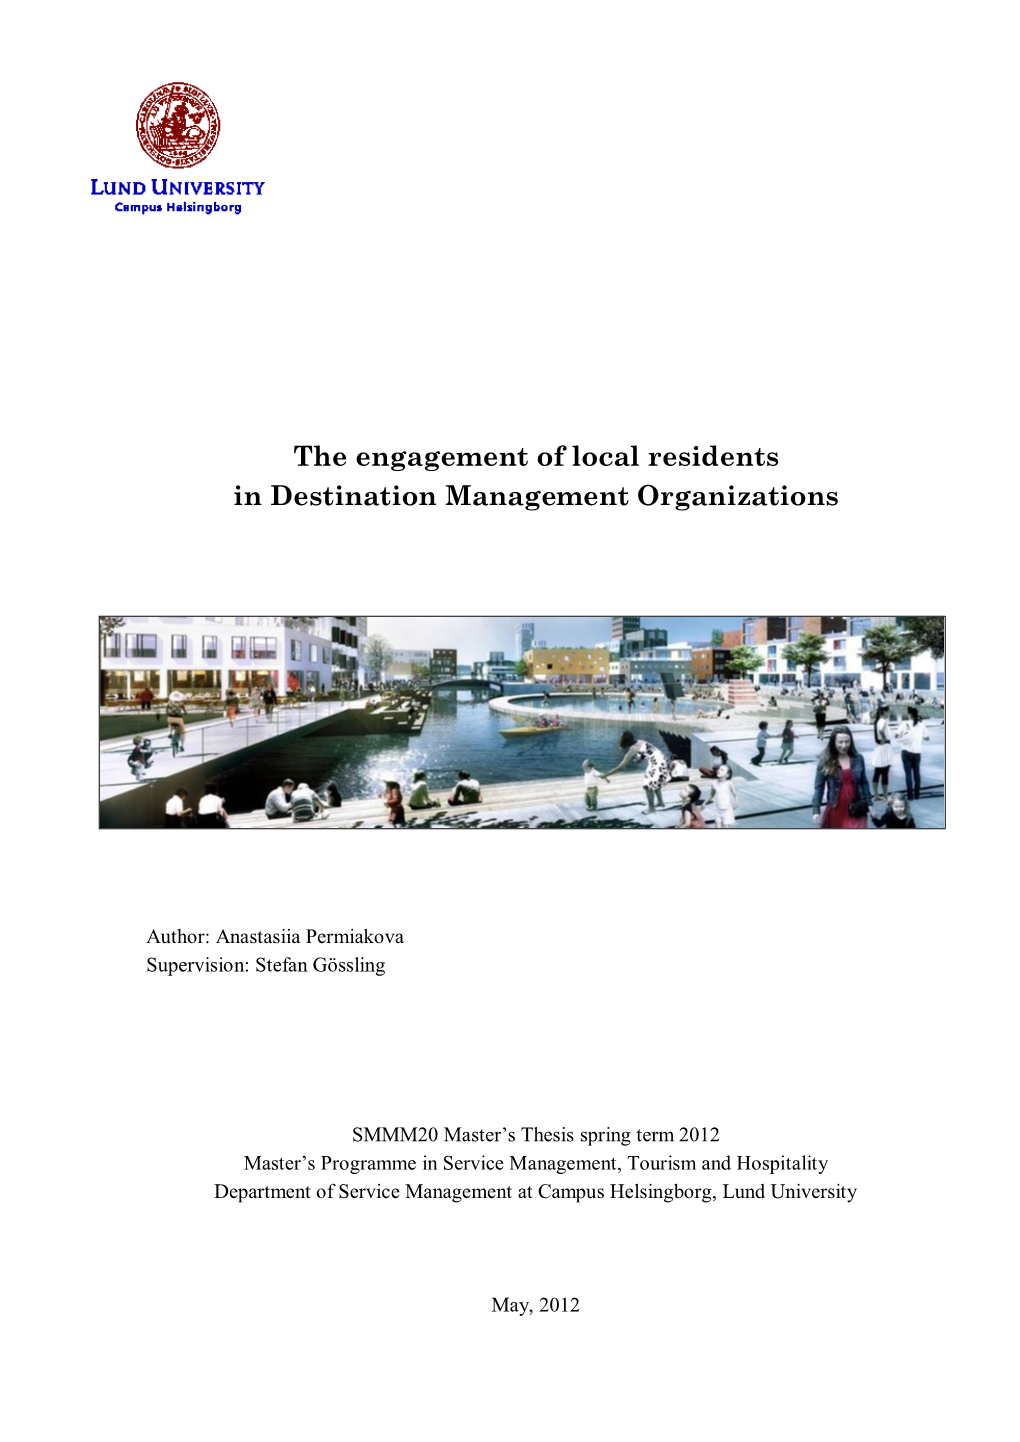 The Engagement of Local Residents in Destination Management Organizations